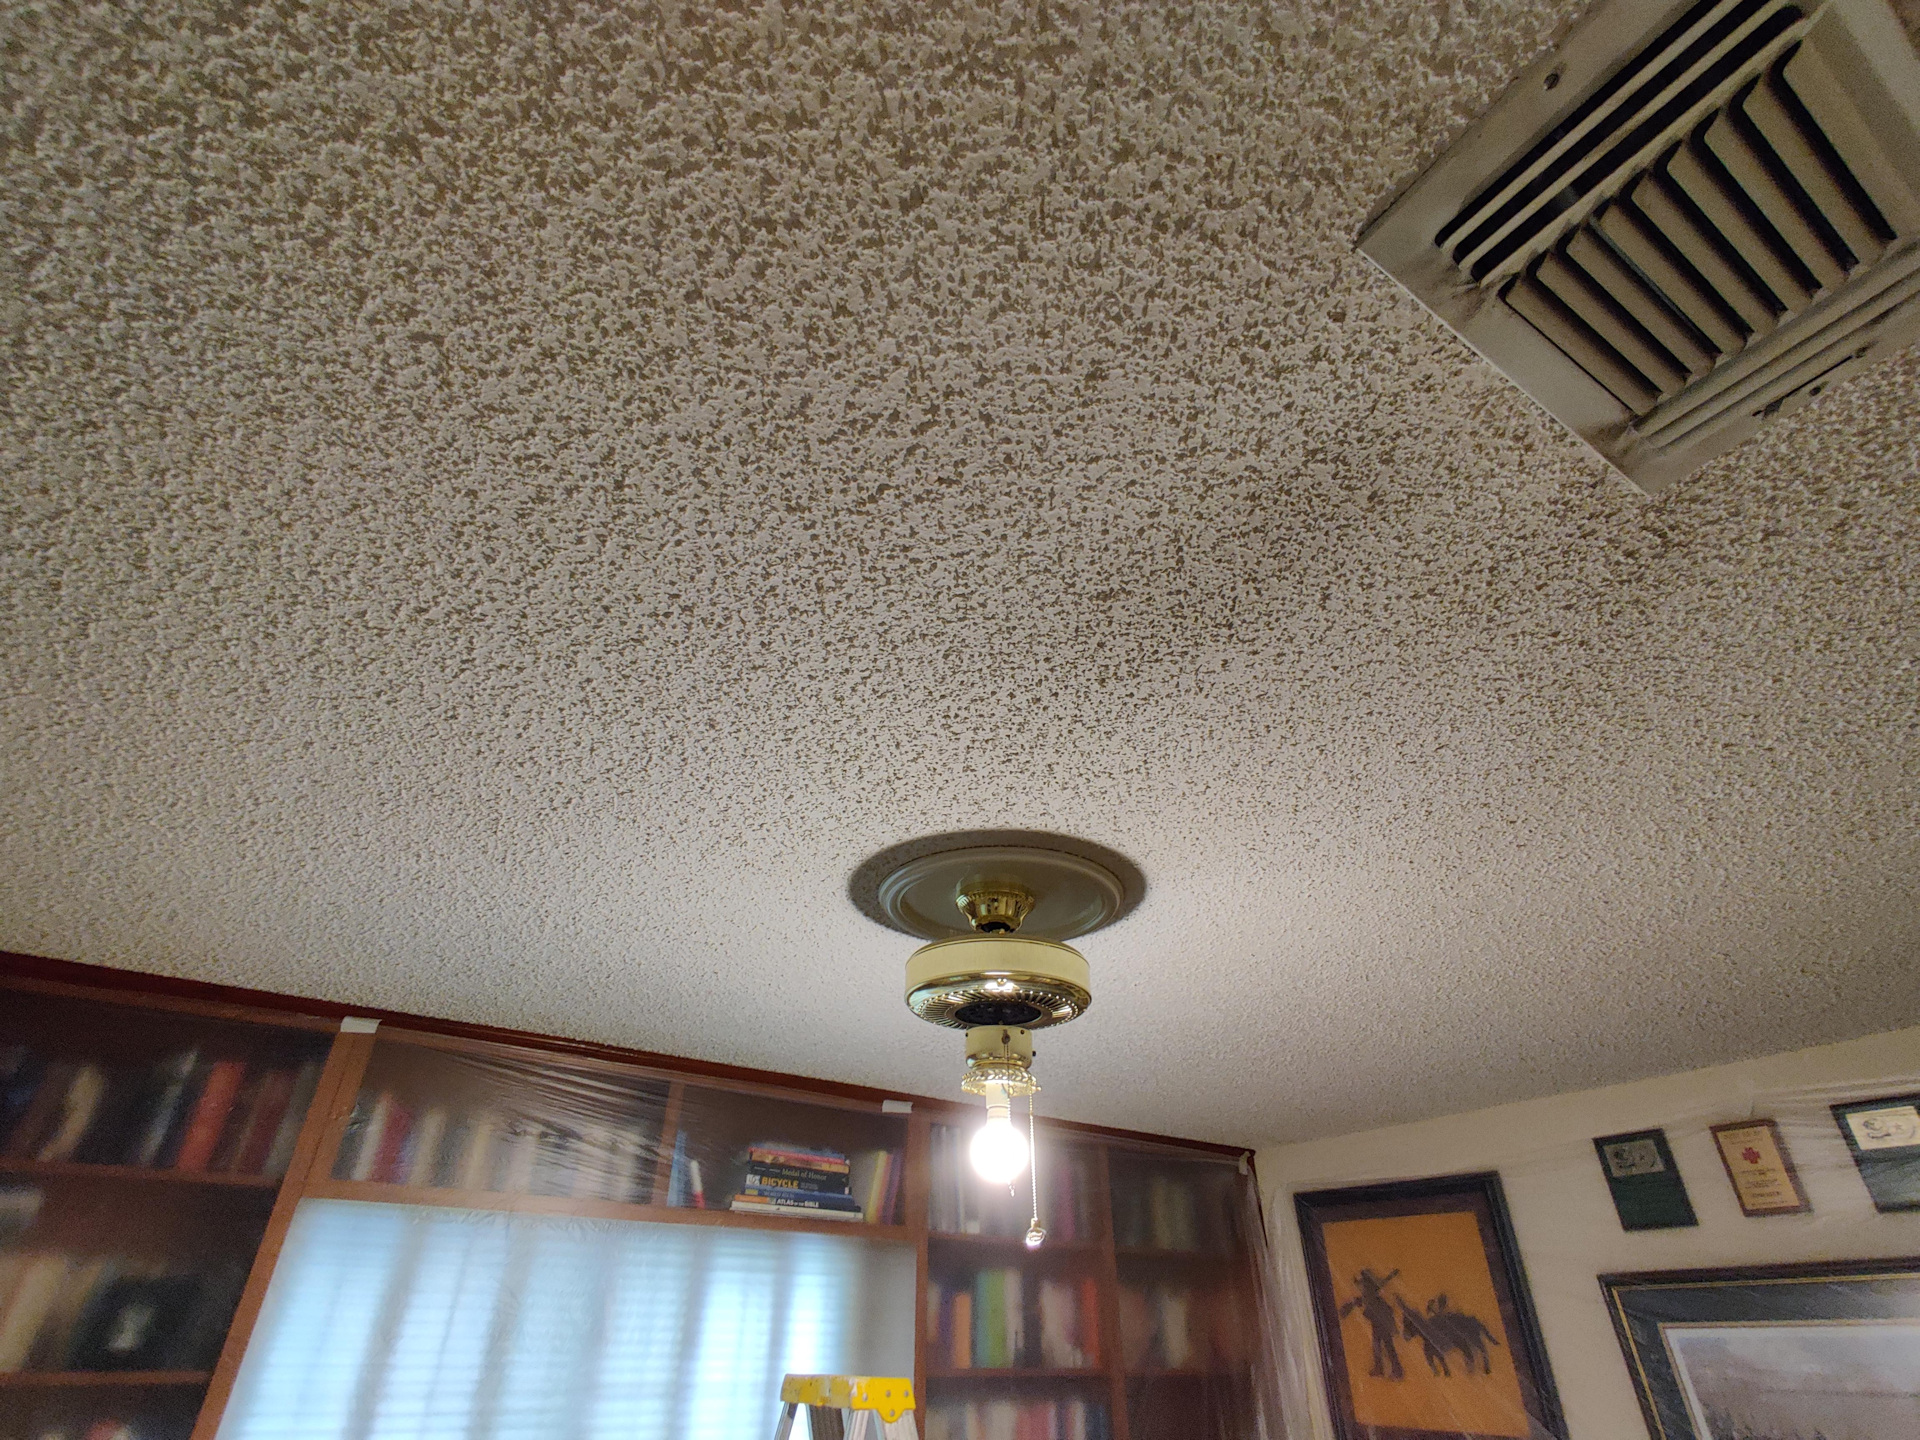 Popcorn Ceiling Removal And Repaint